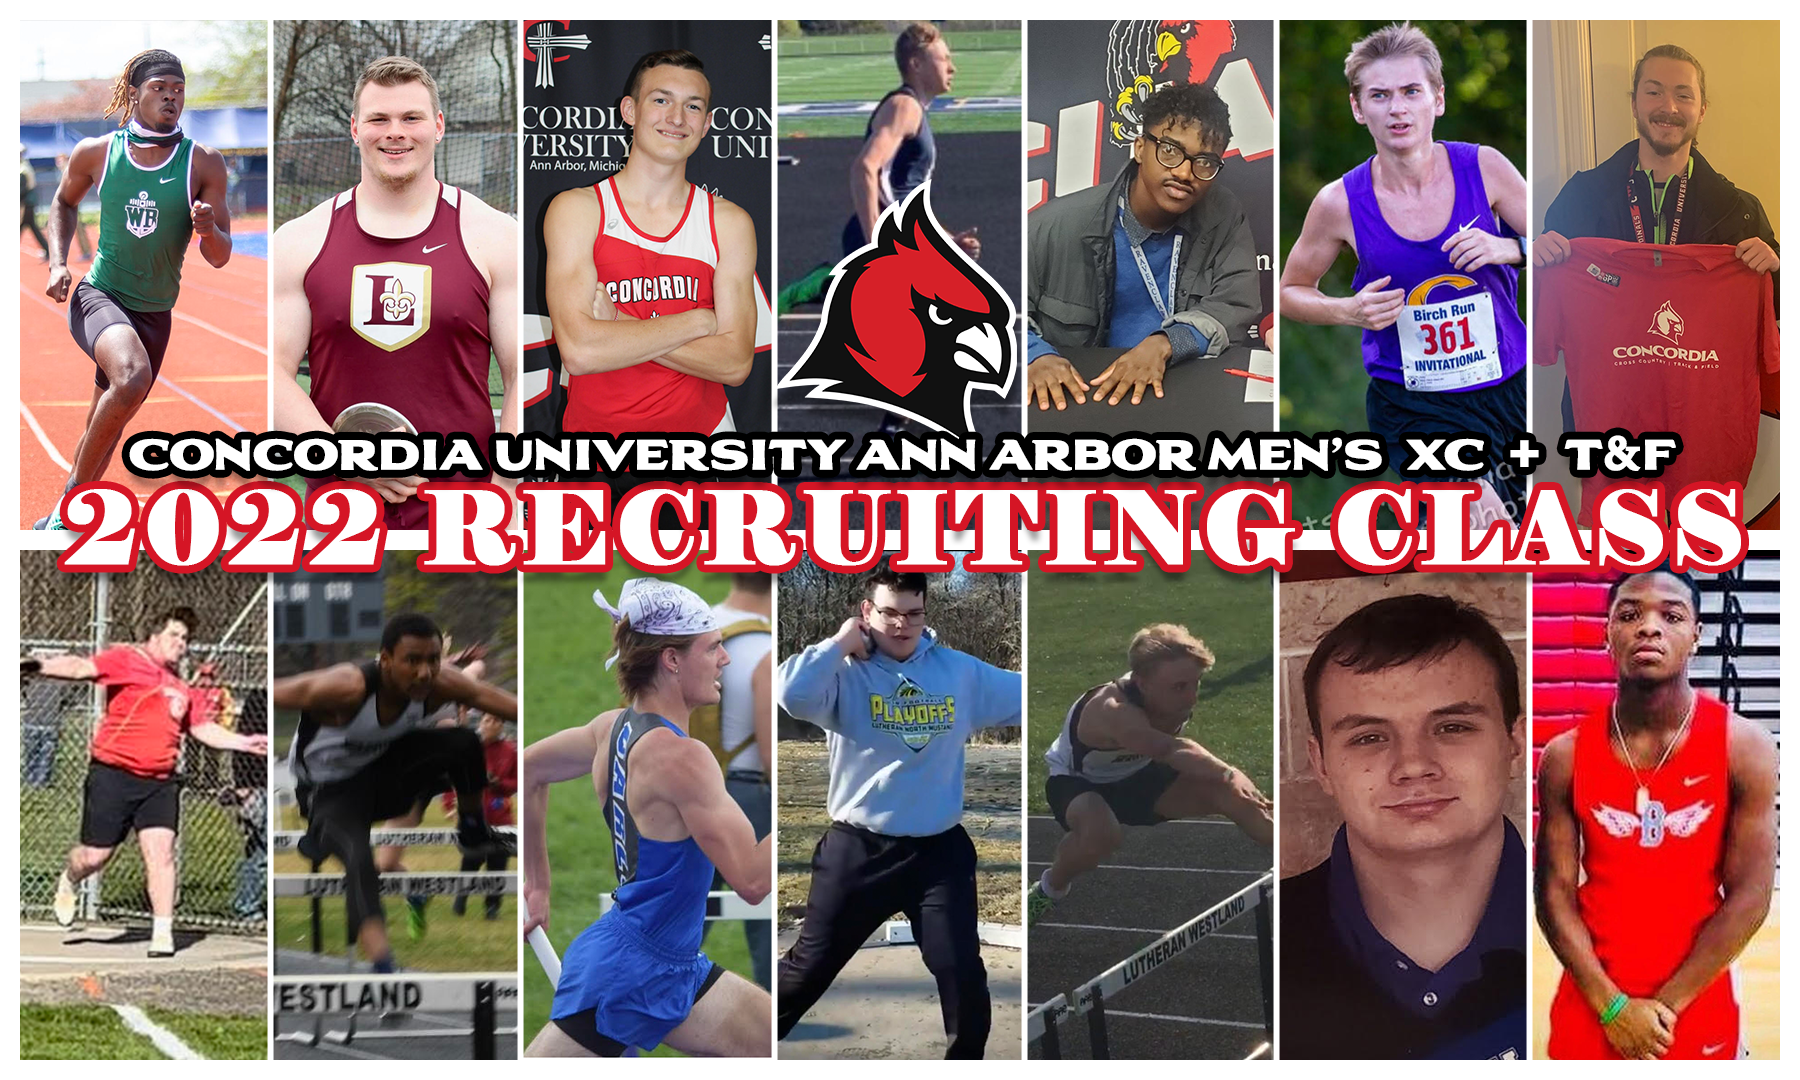 Cross Country and Track & Field Announce 2022-23 Men’s Recruiting Class